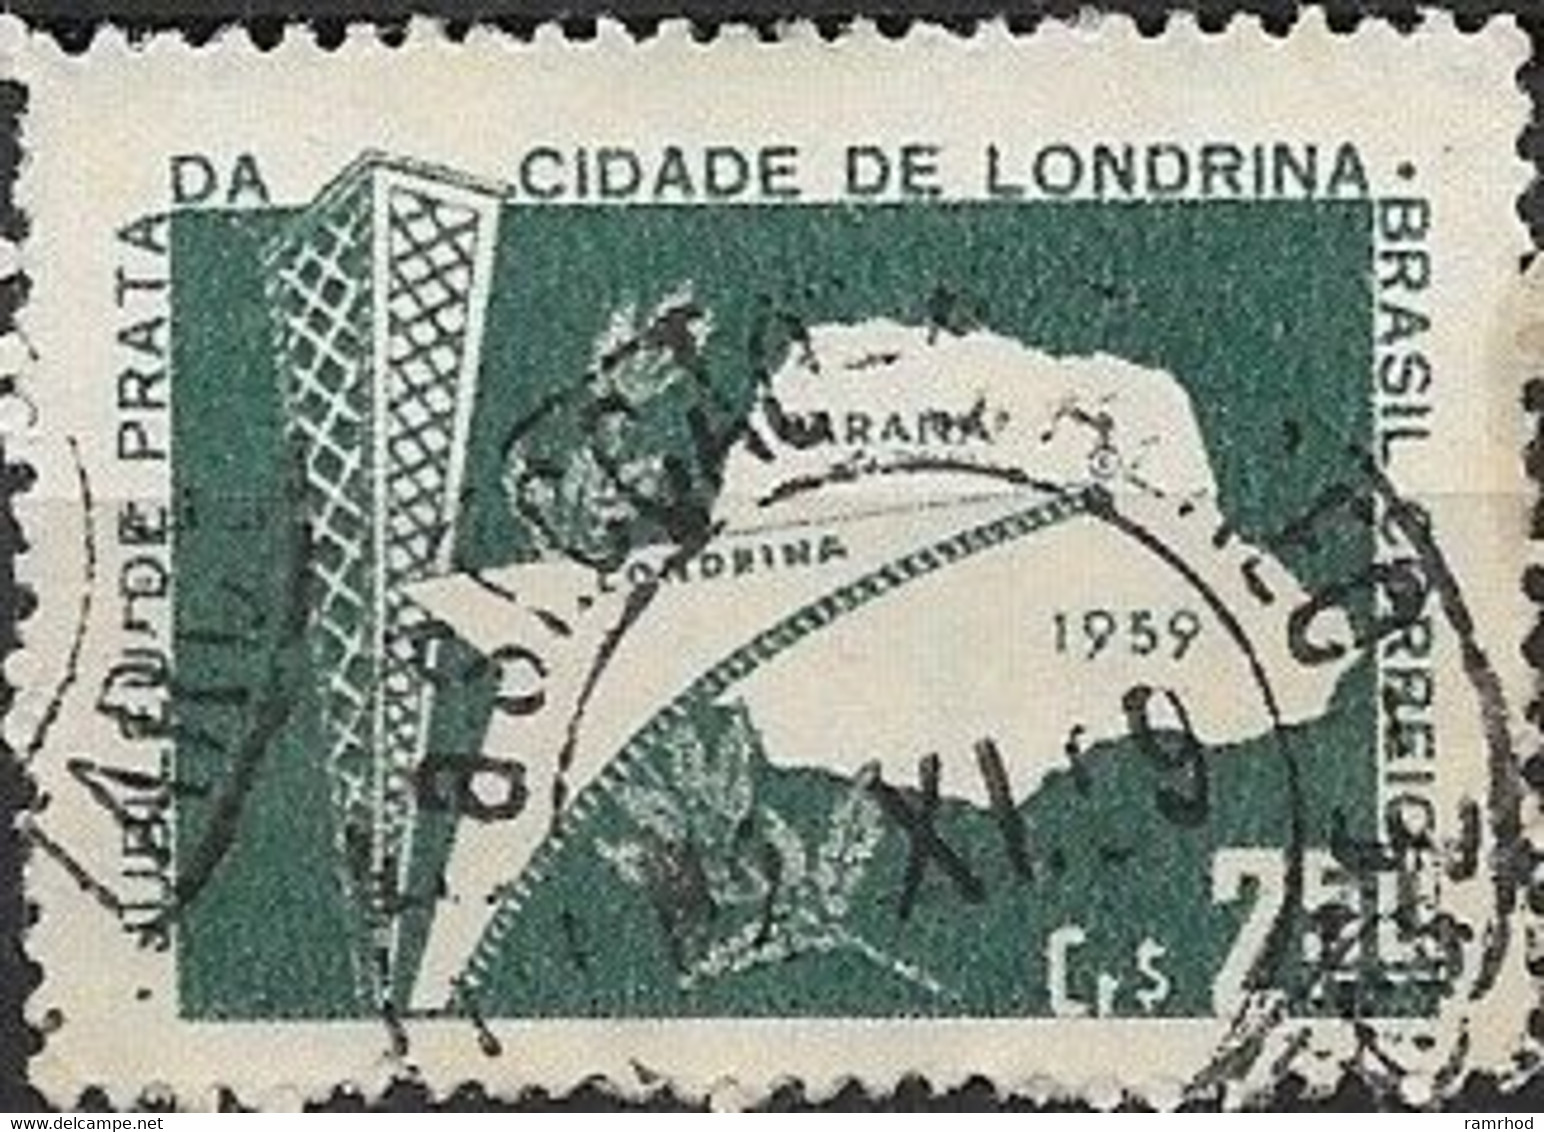 BRAZIL 1959 25th Anniv Of Londrina. - 2cr50 Londrina And Parana FU - Used Stamps